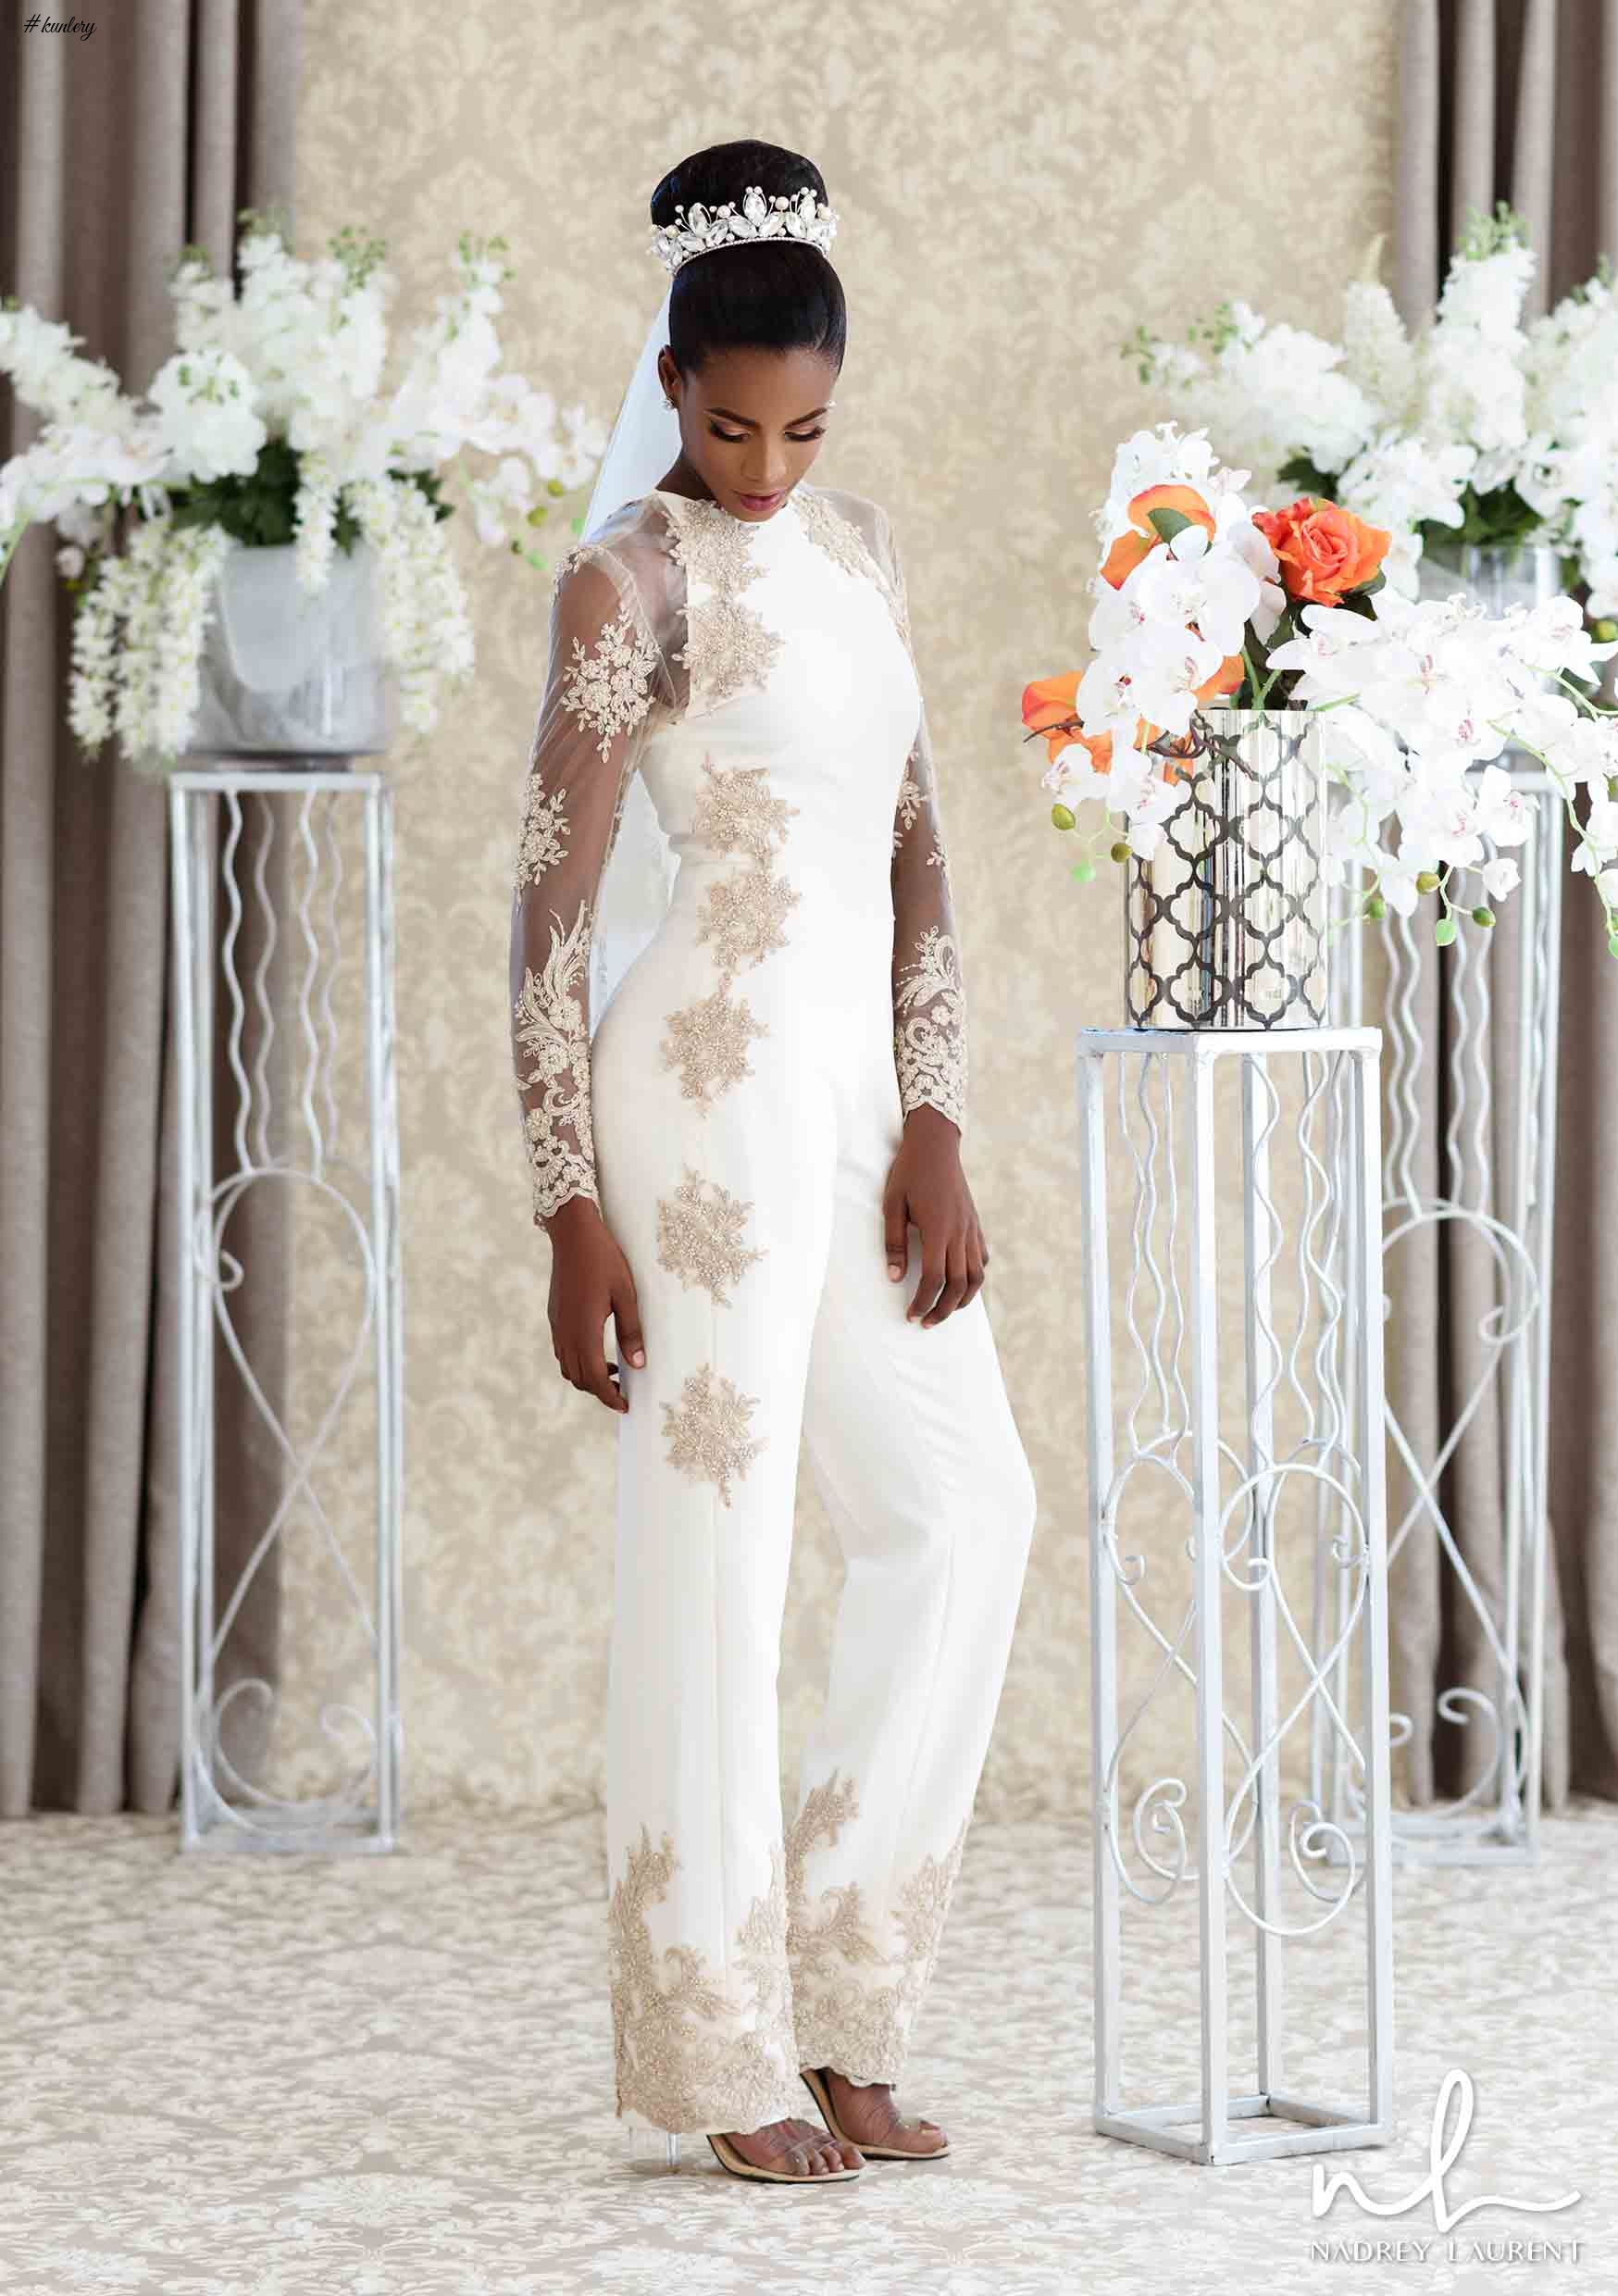 Nadrey Laurent Introduces It’s First Ever Bridal Collection Themed “The Bride”